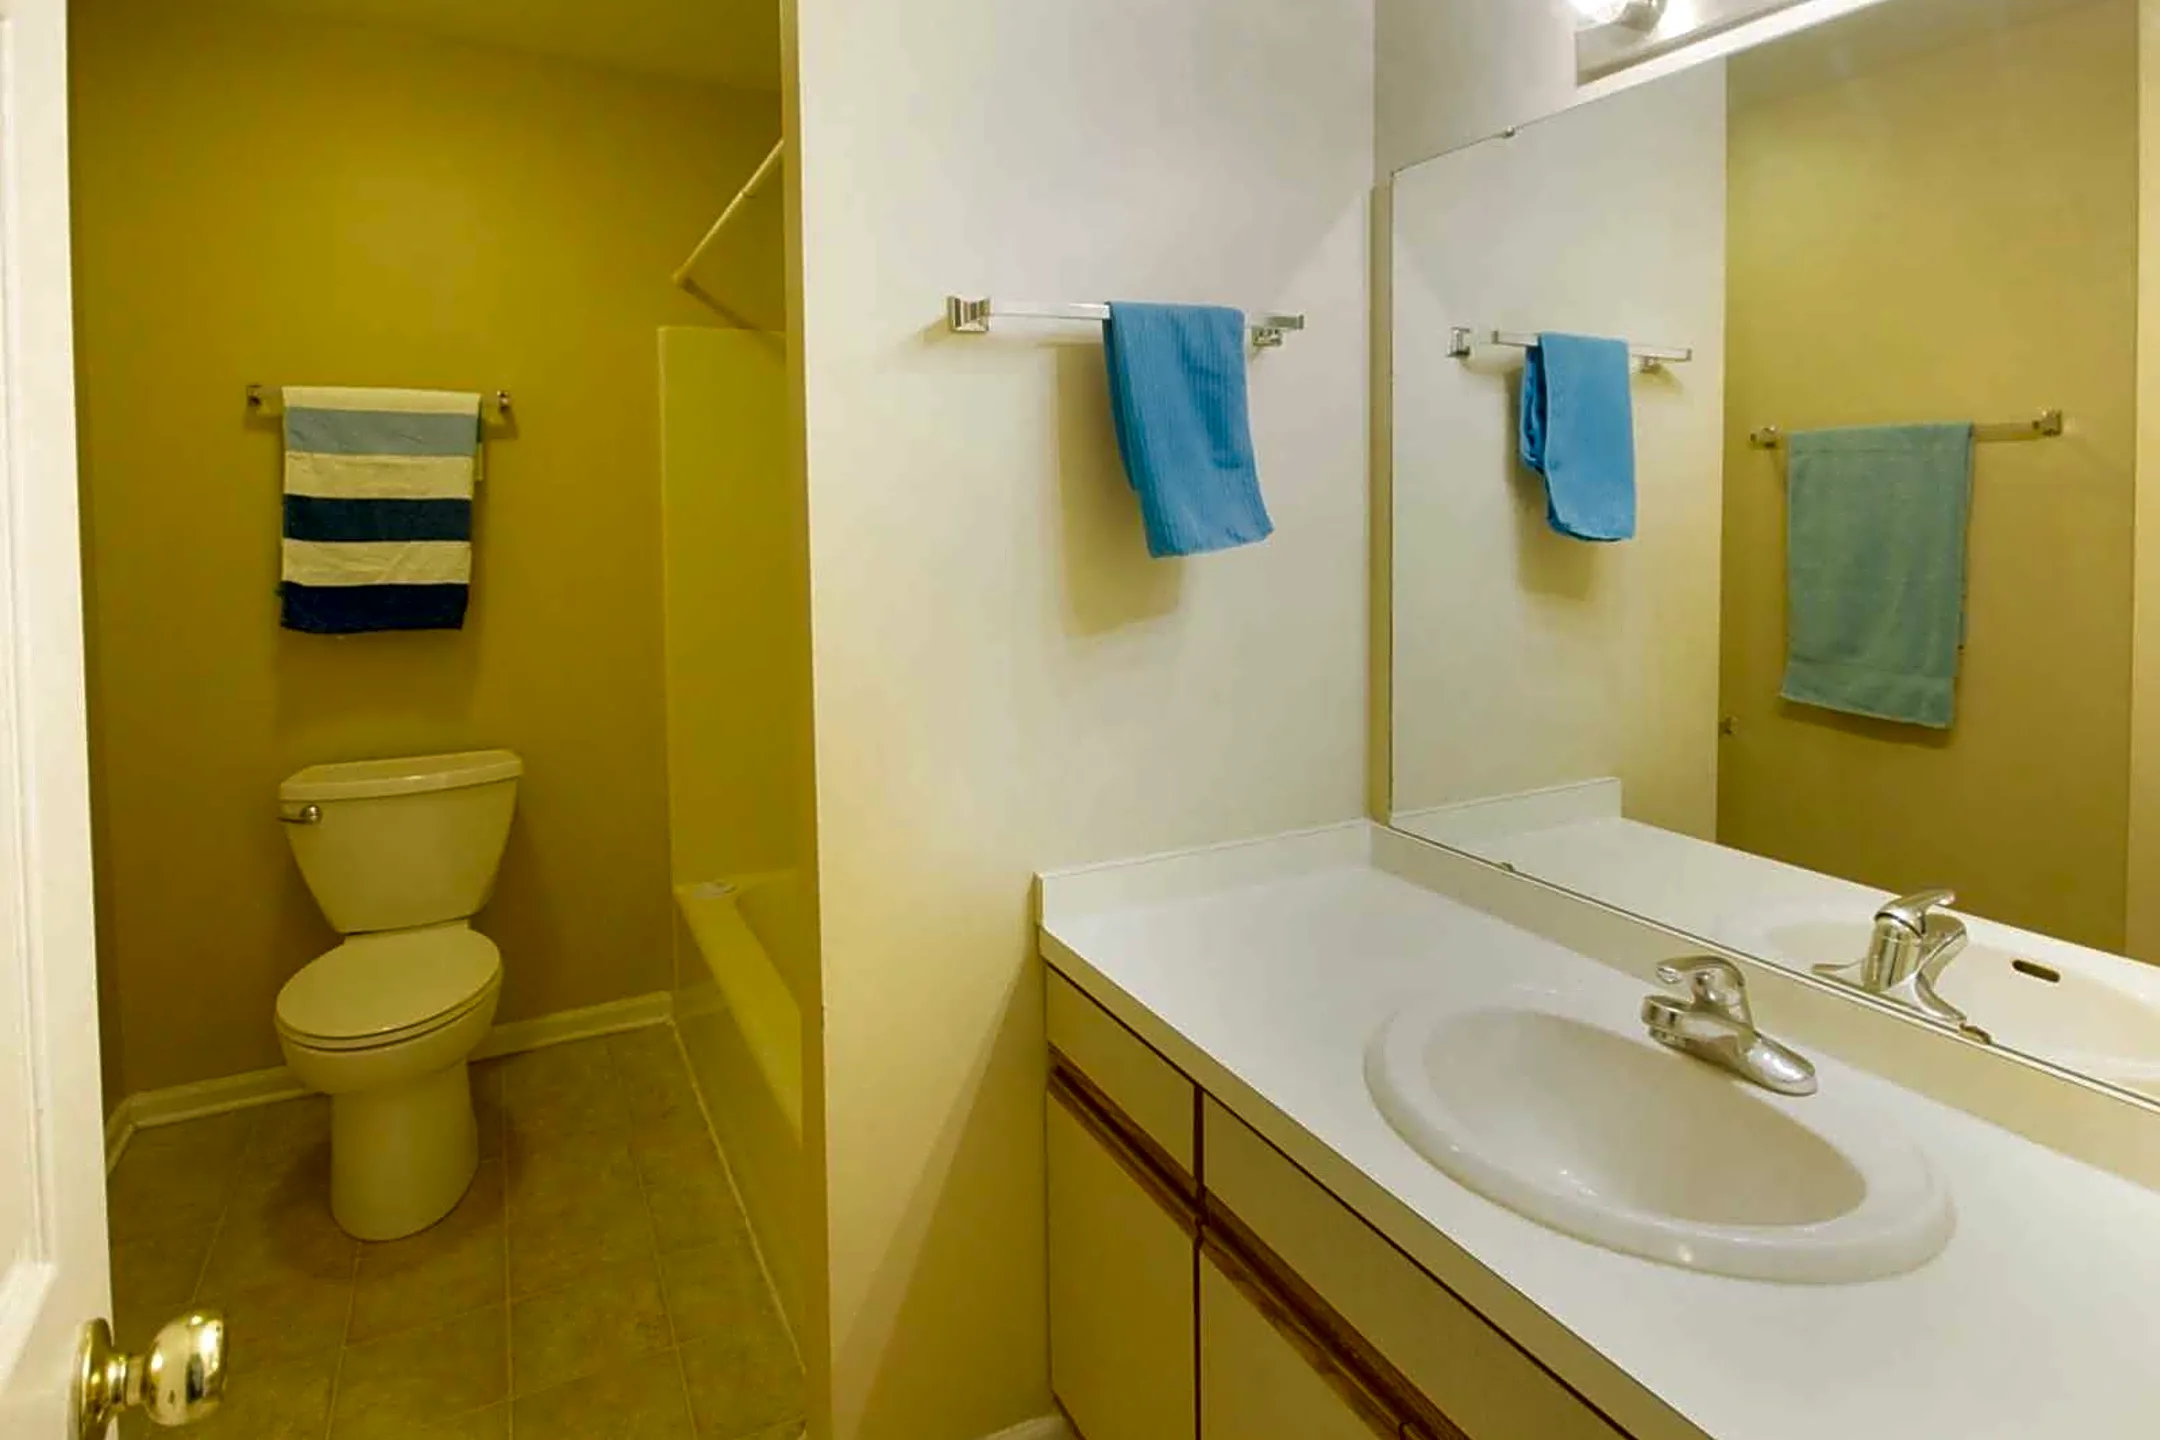 Bathroom - Eddy Street Student Townhomes - South Bend, IN